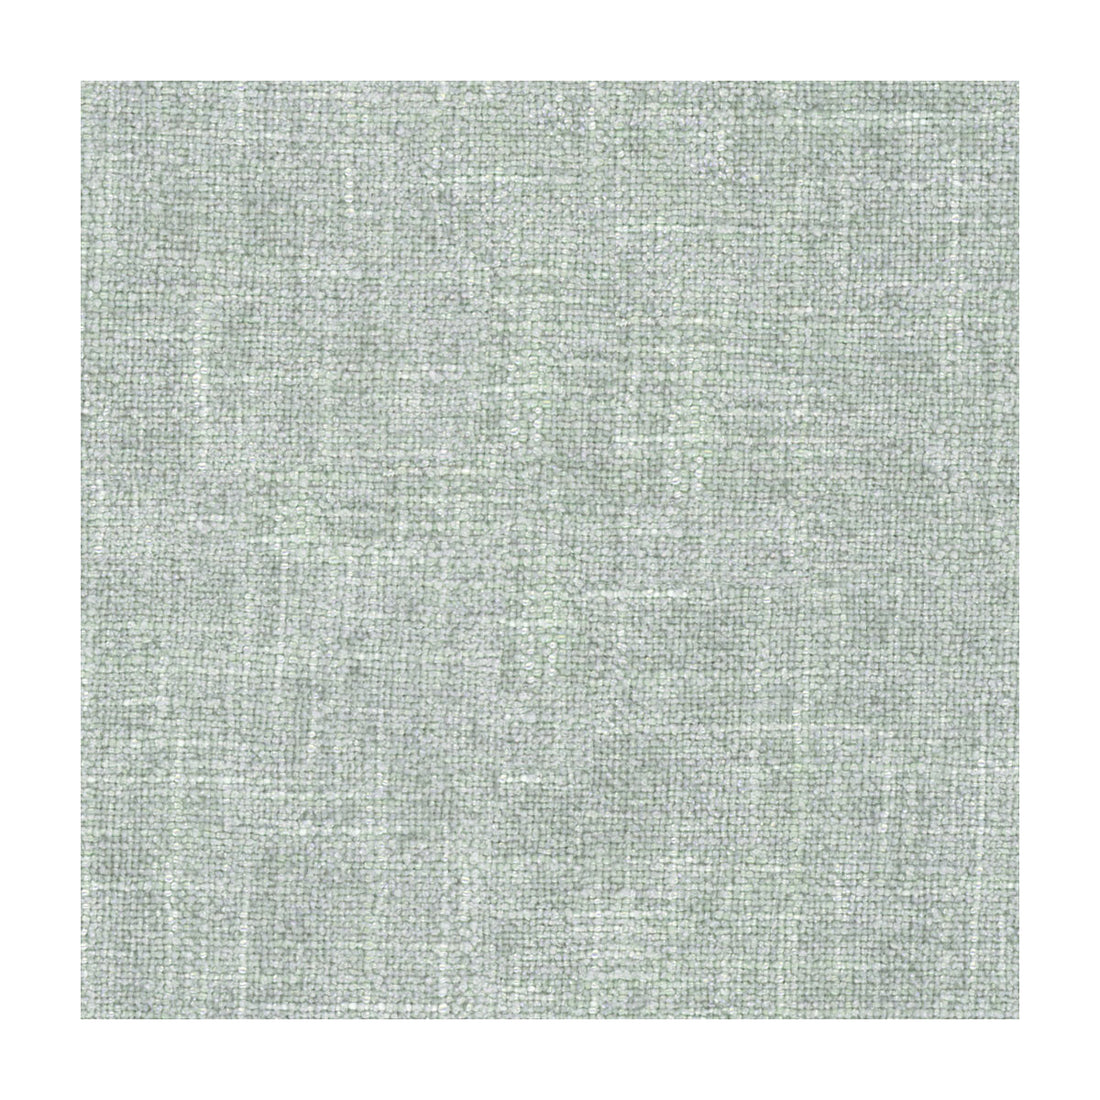 Allstar fabric in mineral color - pattern 34299.52.0 - by Kravet Basics in the Sarah Richardson Harmony collection